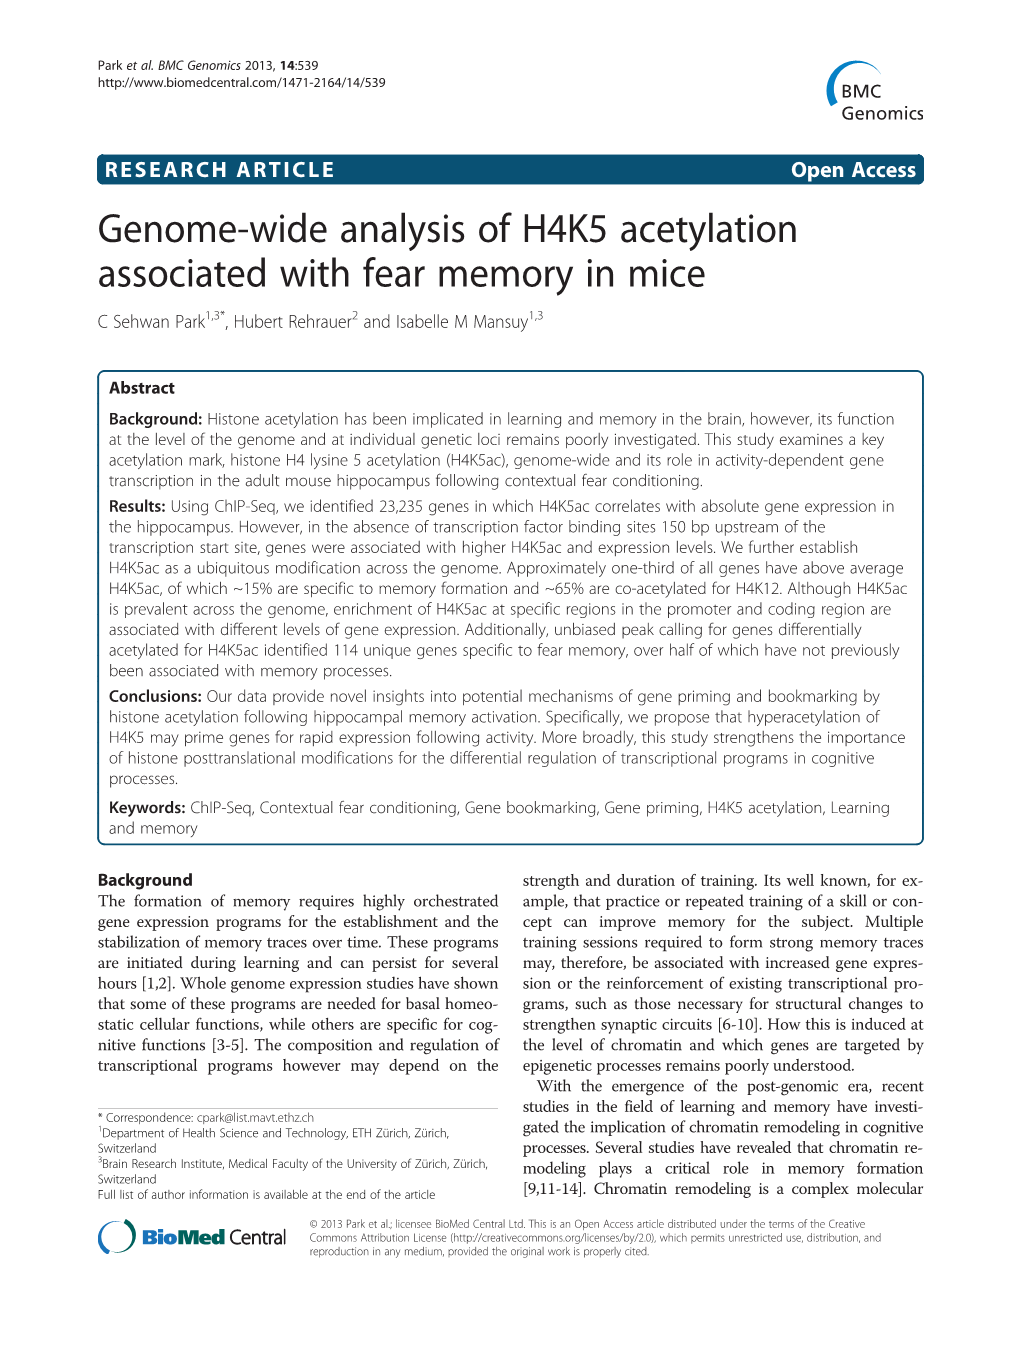 Genome-Wide Analysis of H4K5 Acetylation Associated with Fear Memory in Mice C Sehwan Park1,3*, Hubert Rehrauer2 and Isabelle M Mansuy1,3